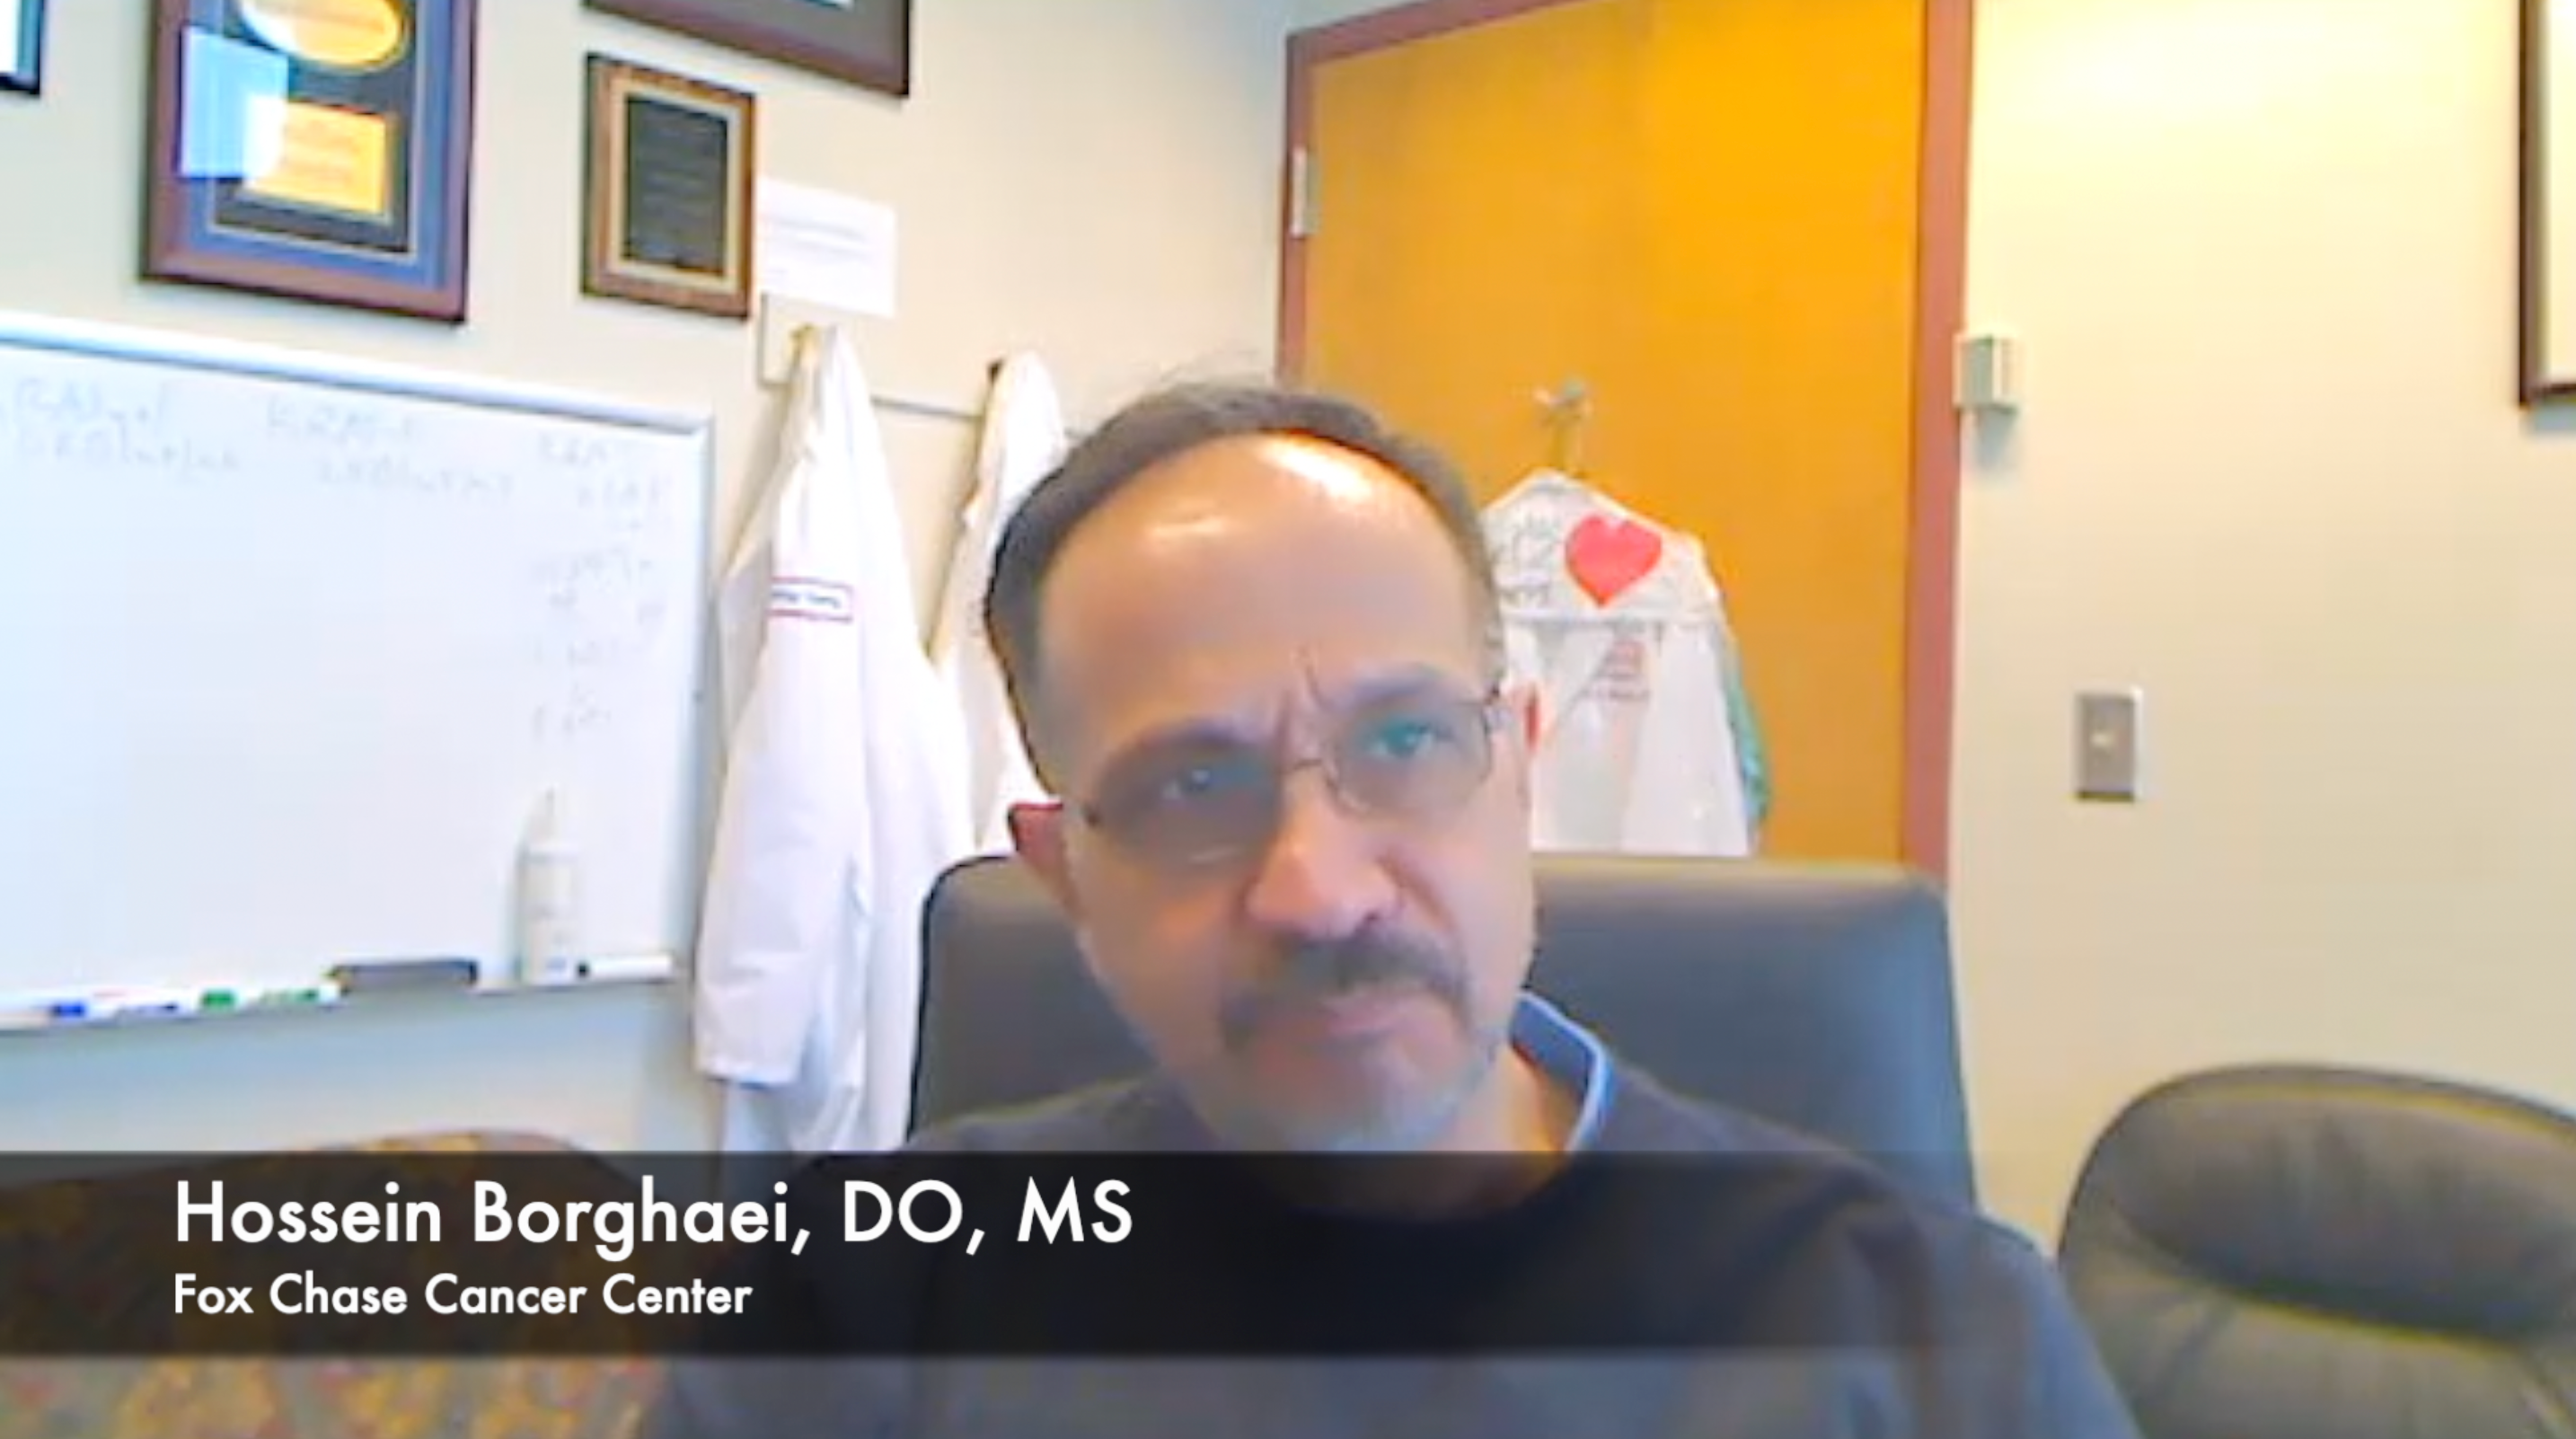 Hossein Borghaei, DO, MS, Offers His Advice on Staying Up to Date With Lung Cancer Research